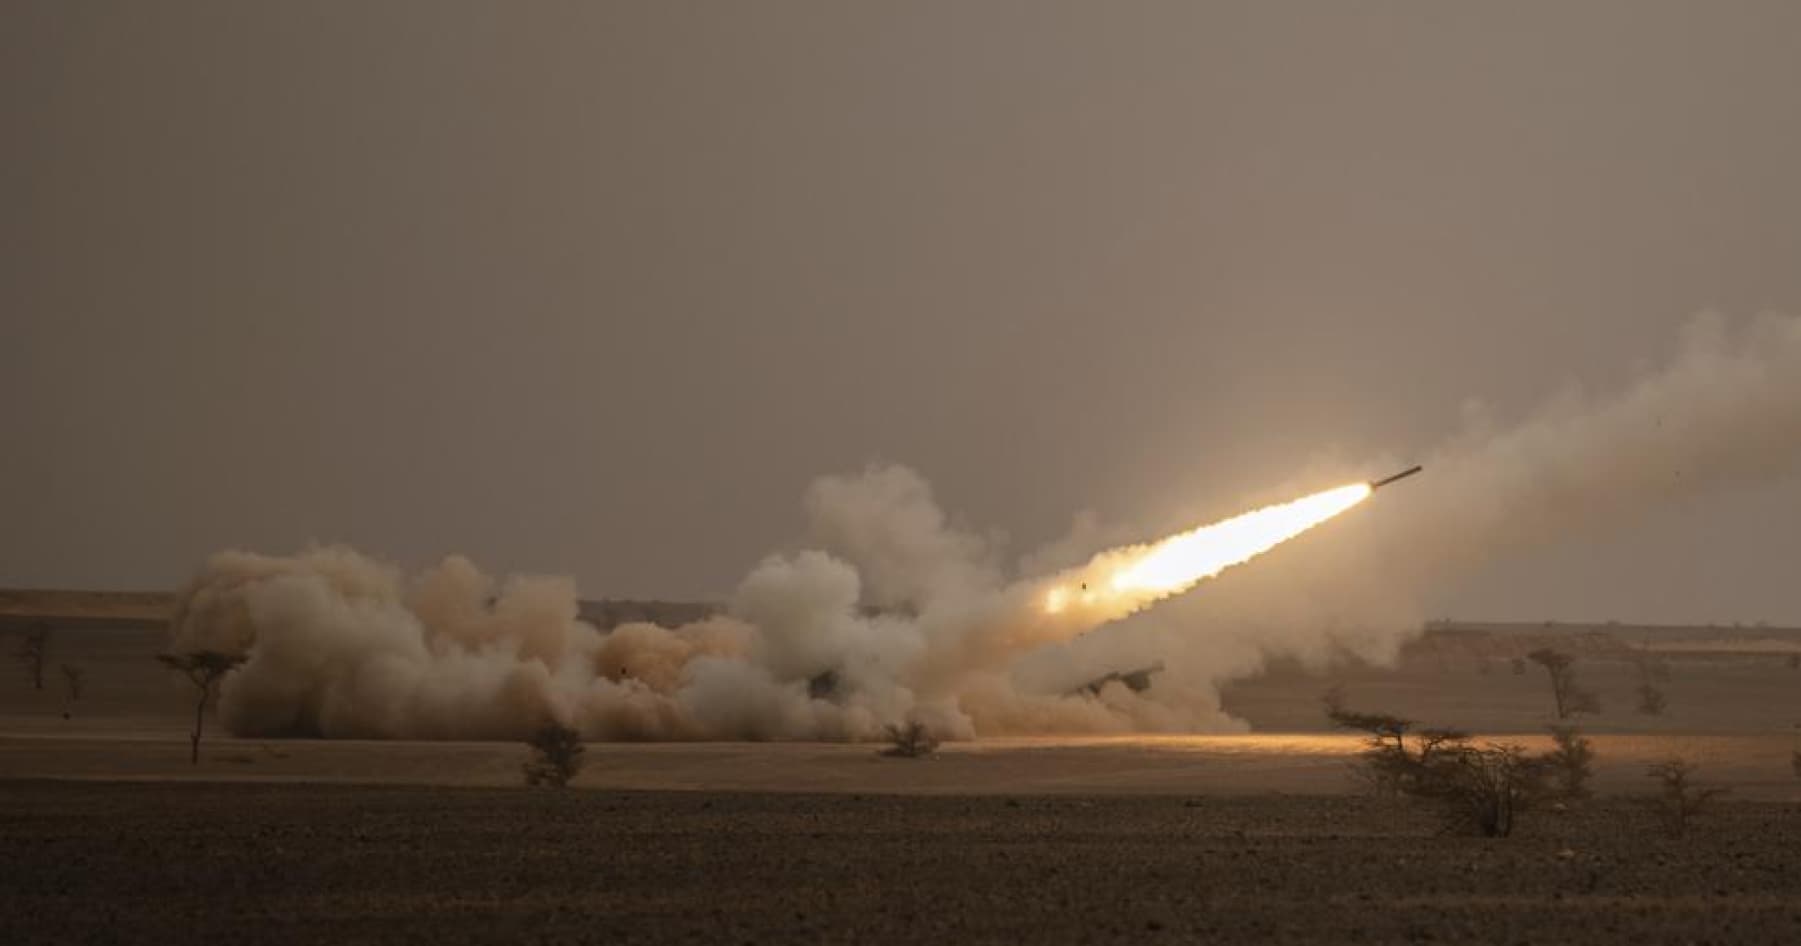 The United States will provide military aid to Ukraine worth $1.1 billion, including 18 HIMARS systems